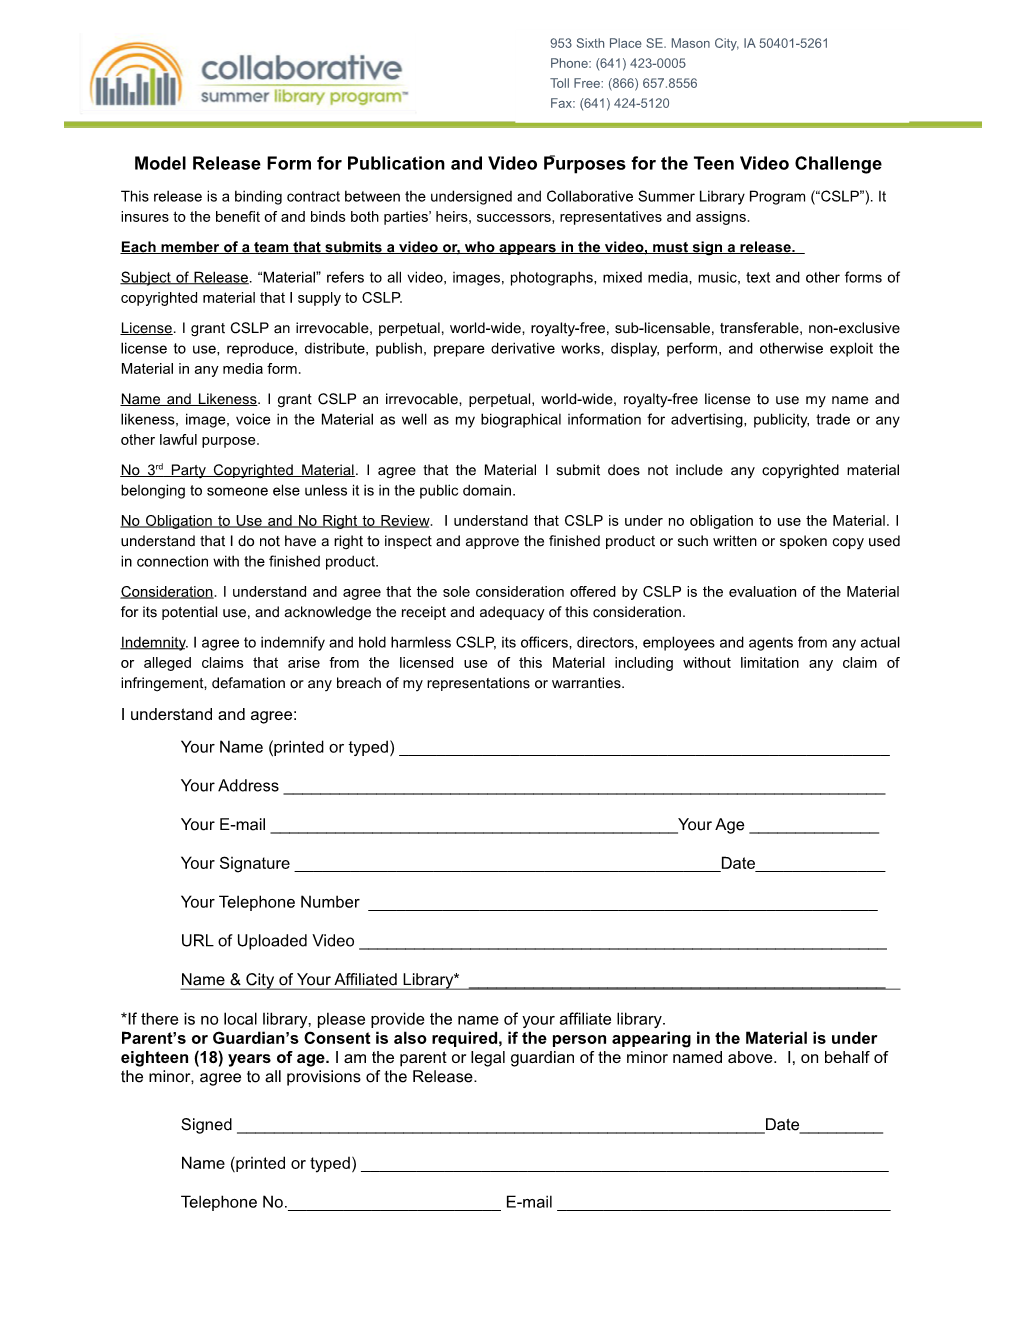 Model Release Form for Publication and Video Purposes for the Teen Video Challenge